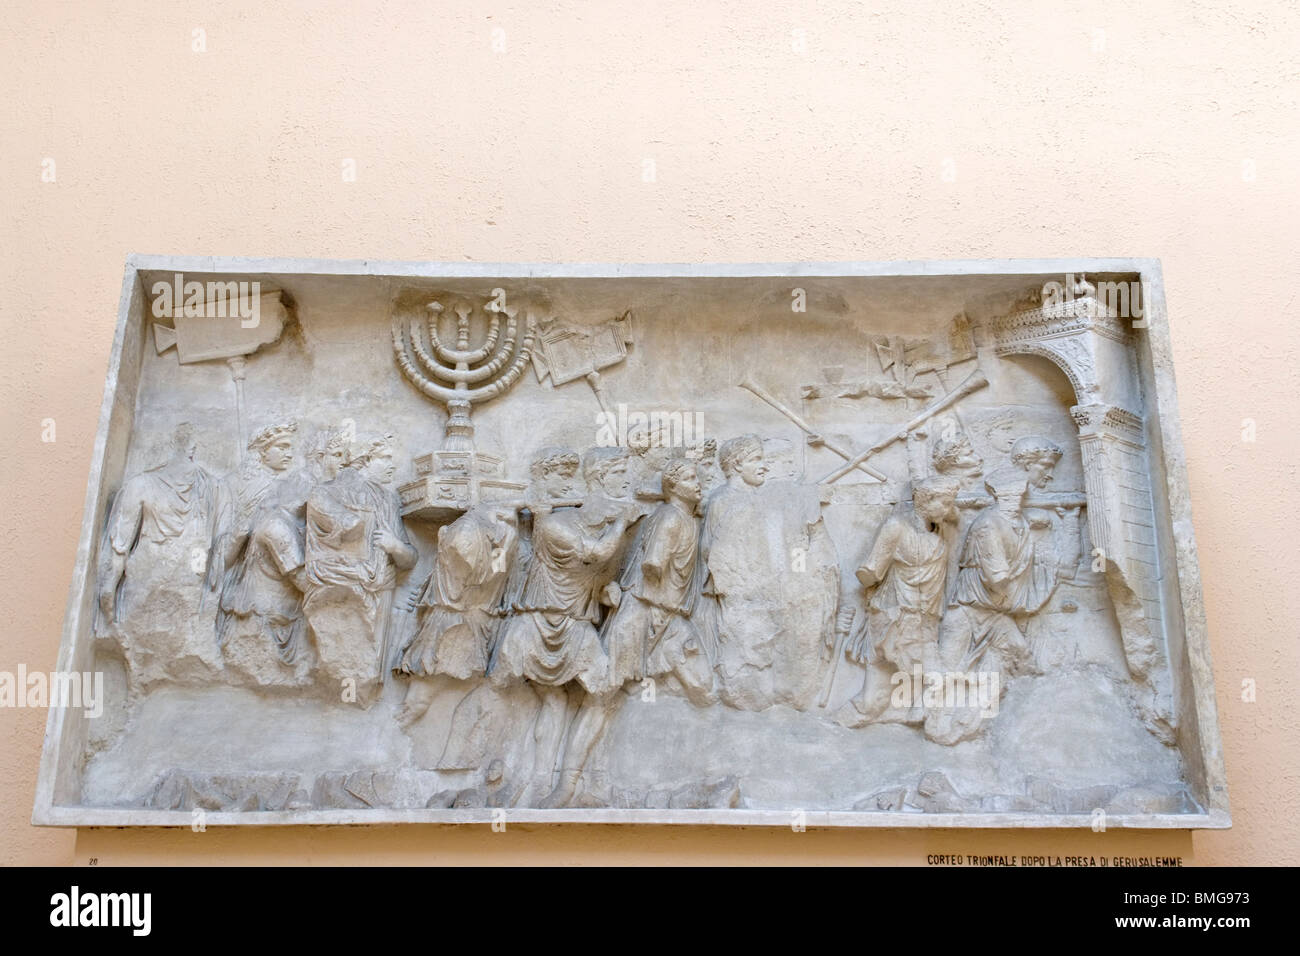 Plaster cast of the bas-relief on the Arch of Titus showing the menorah Stock Photo